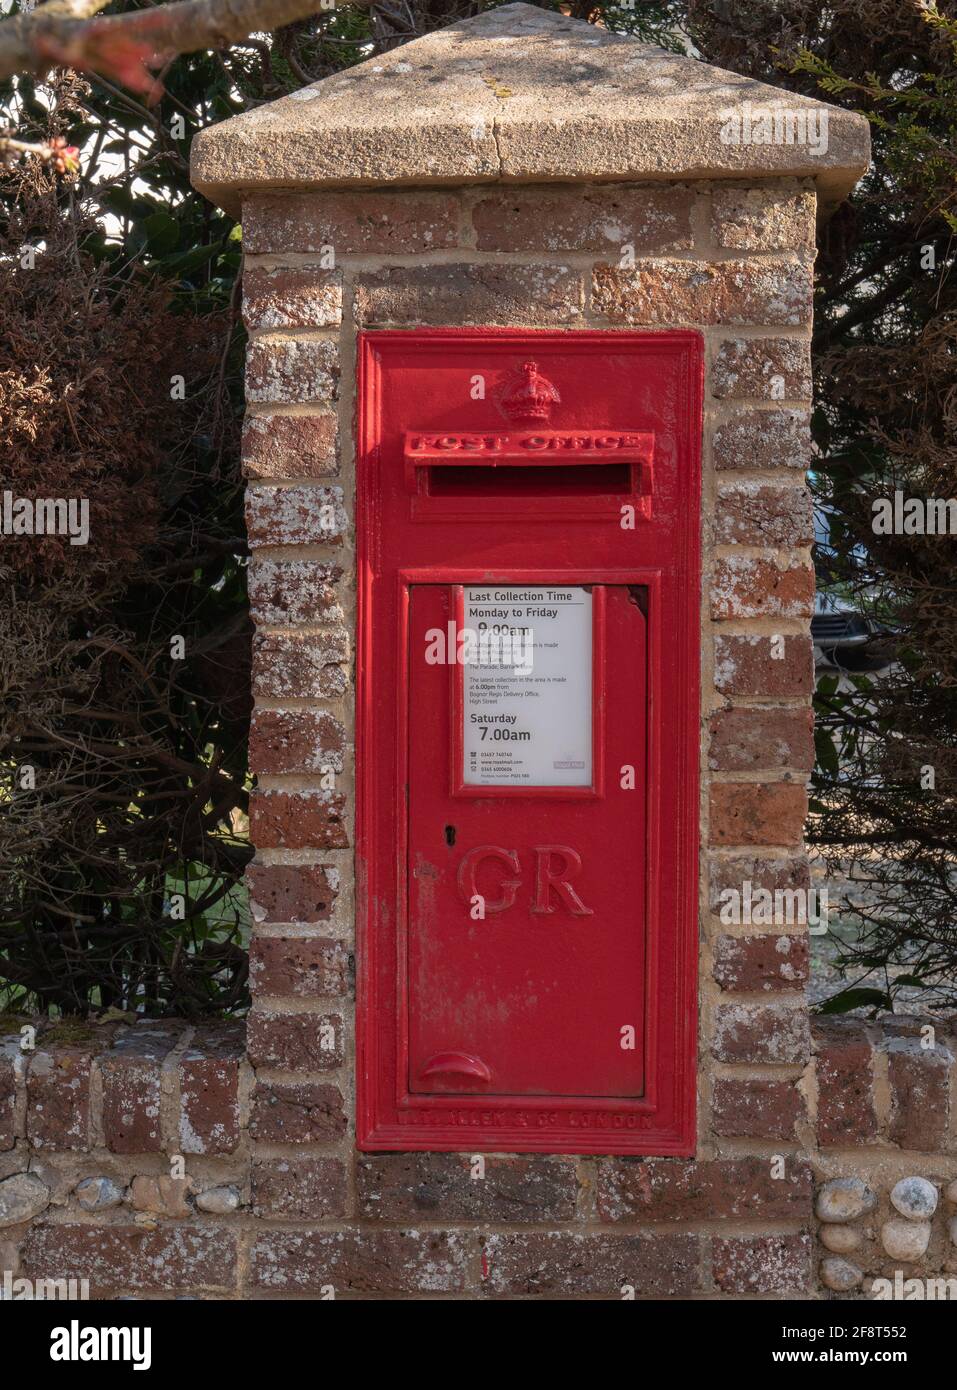 UK letterbox seen in a wall outside. Stock Photo